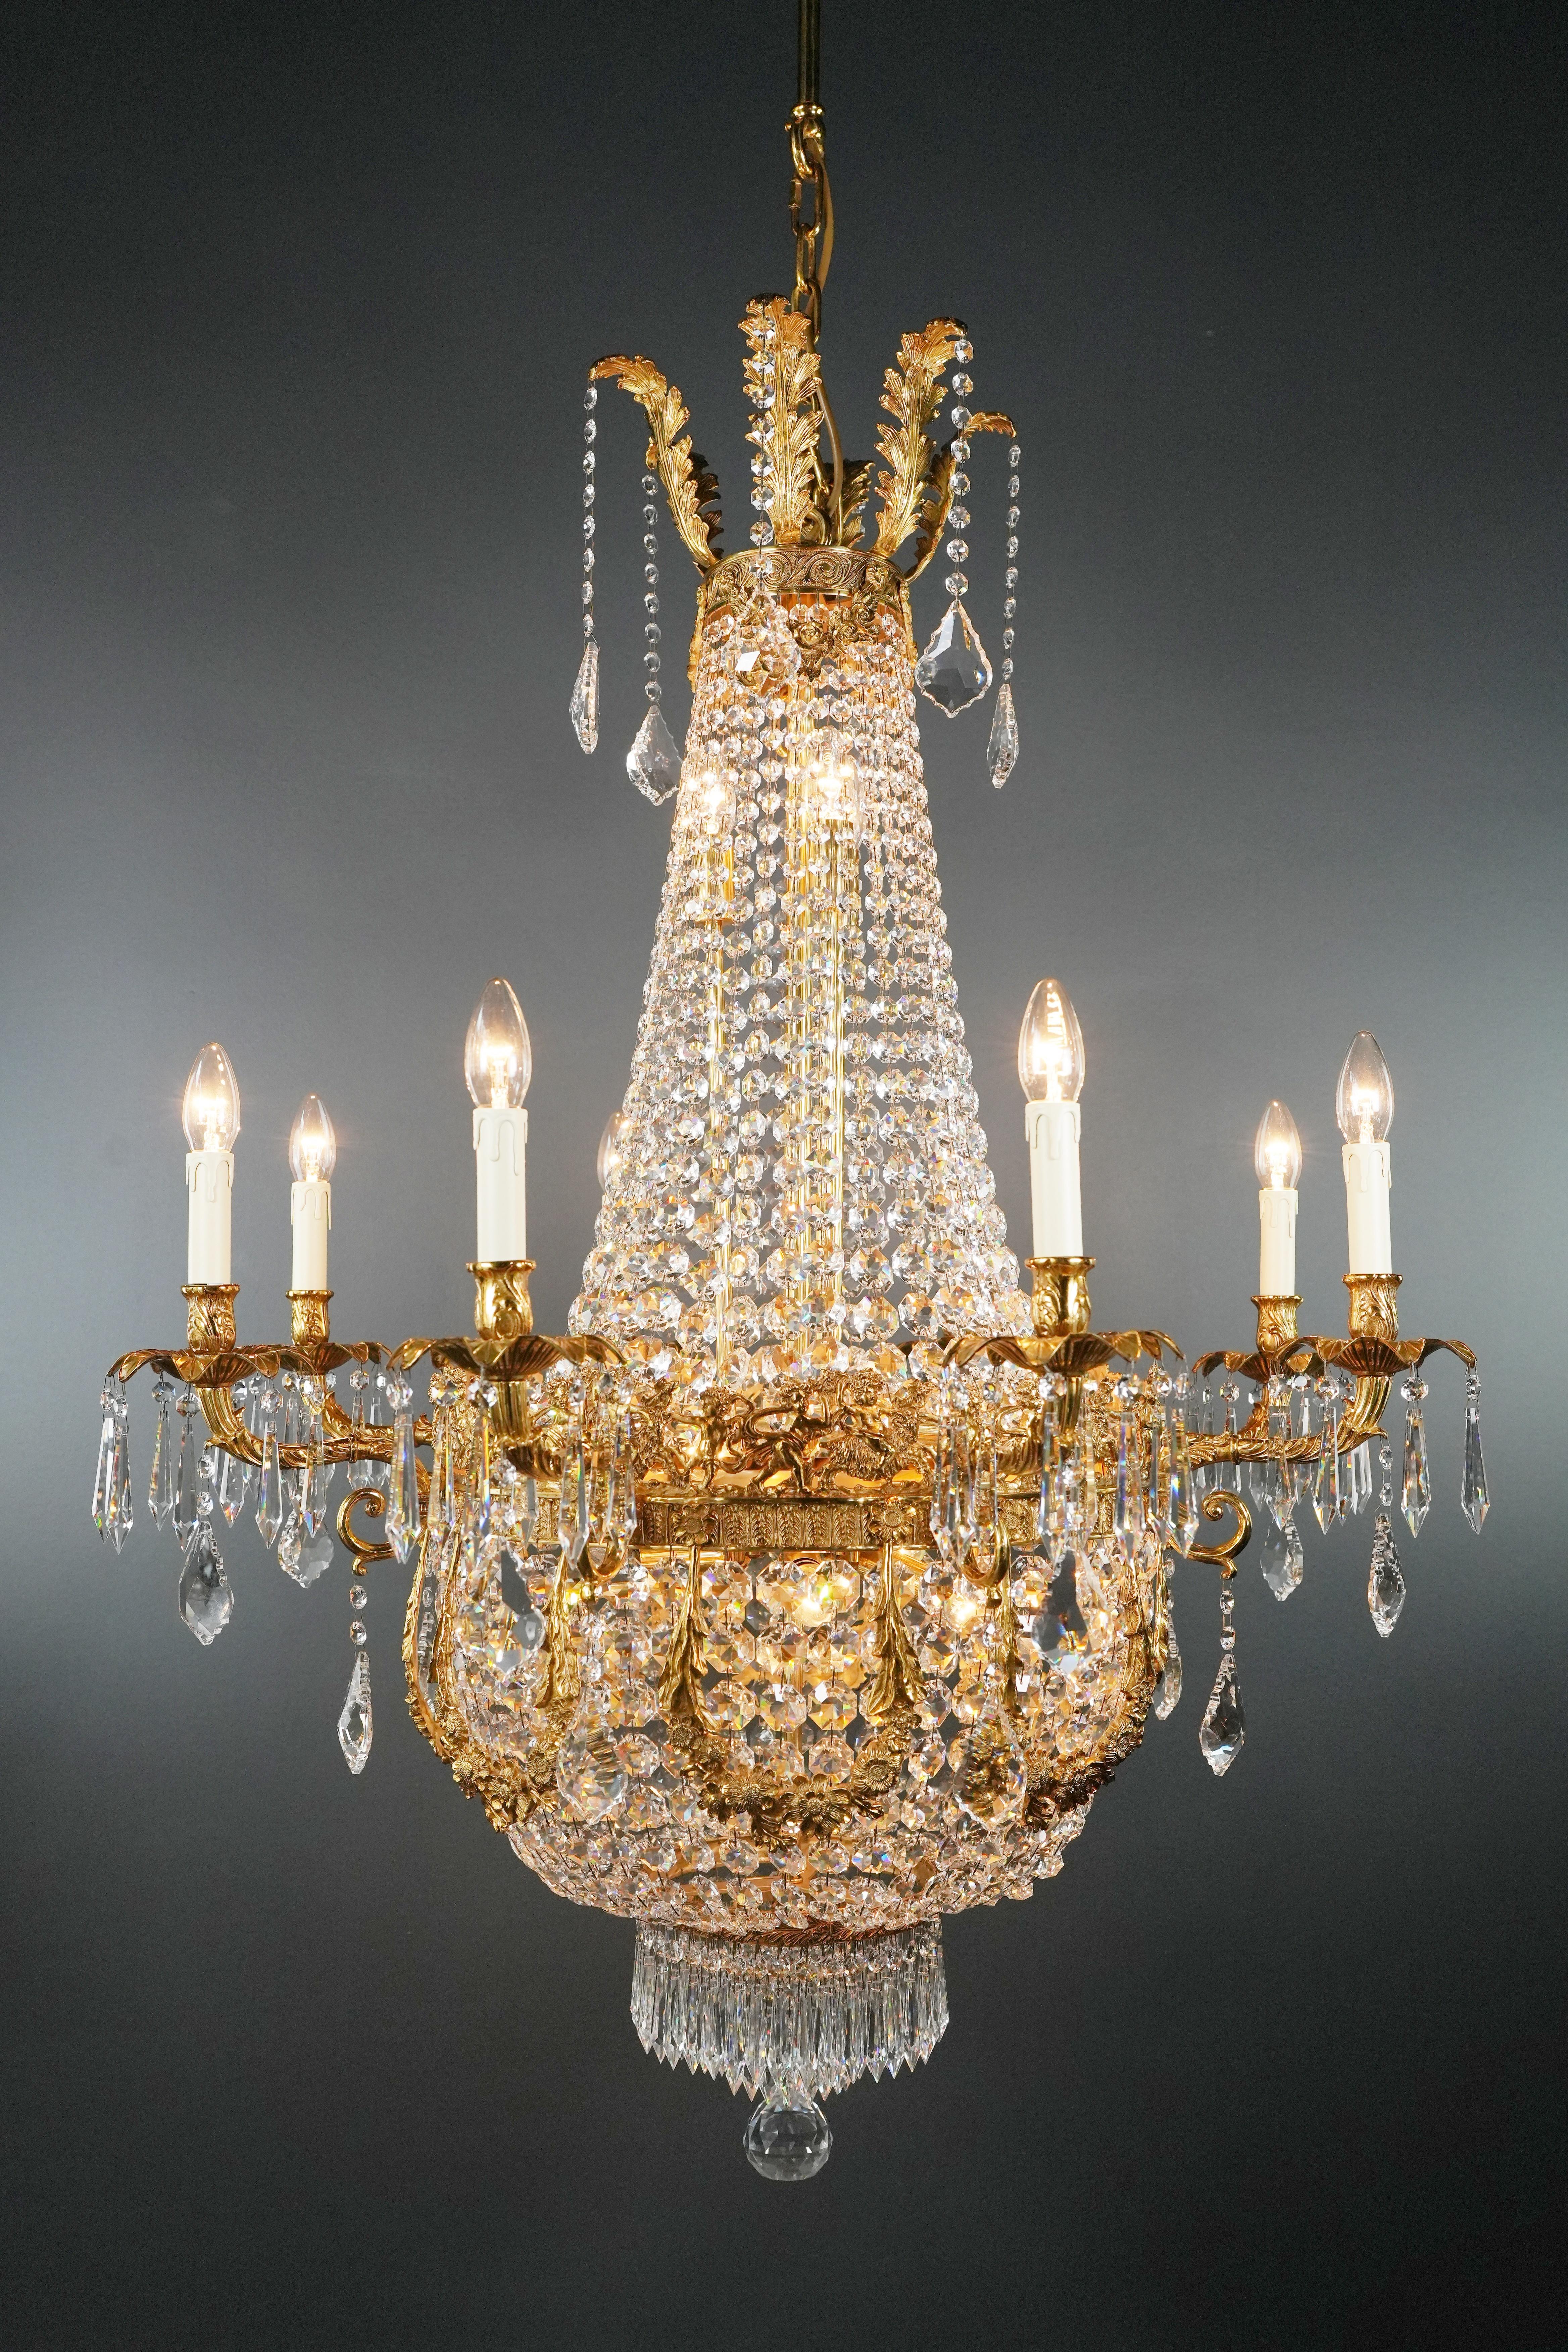 Introducing a stunning Brass Basket Empire Sac a Pearl Chandelier, an exquisite piece adorned with captivating crystals, reminiscent of the classical style of the Empire era. This is a new reproduction, and several are available, ensuring you can